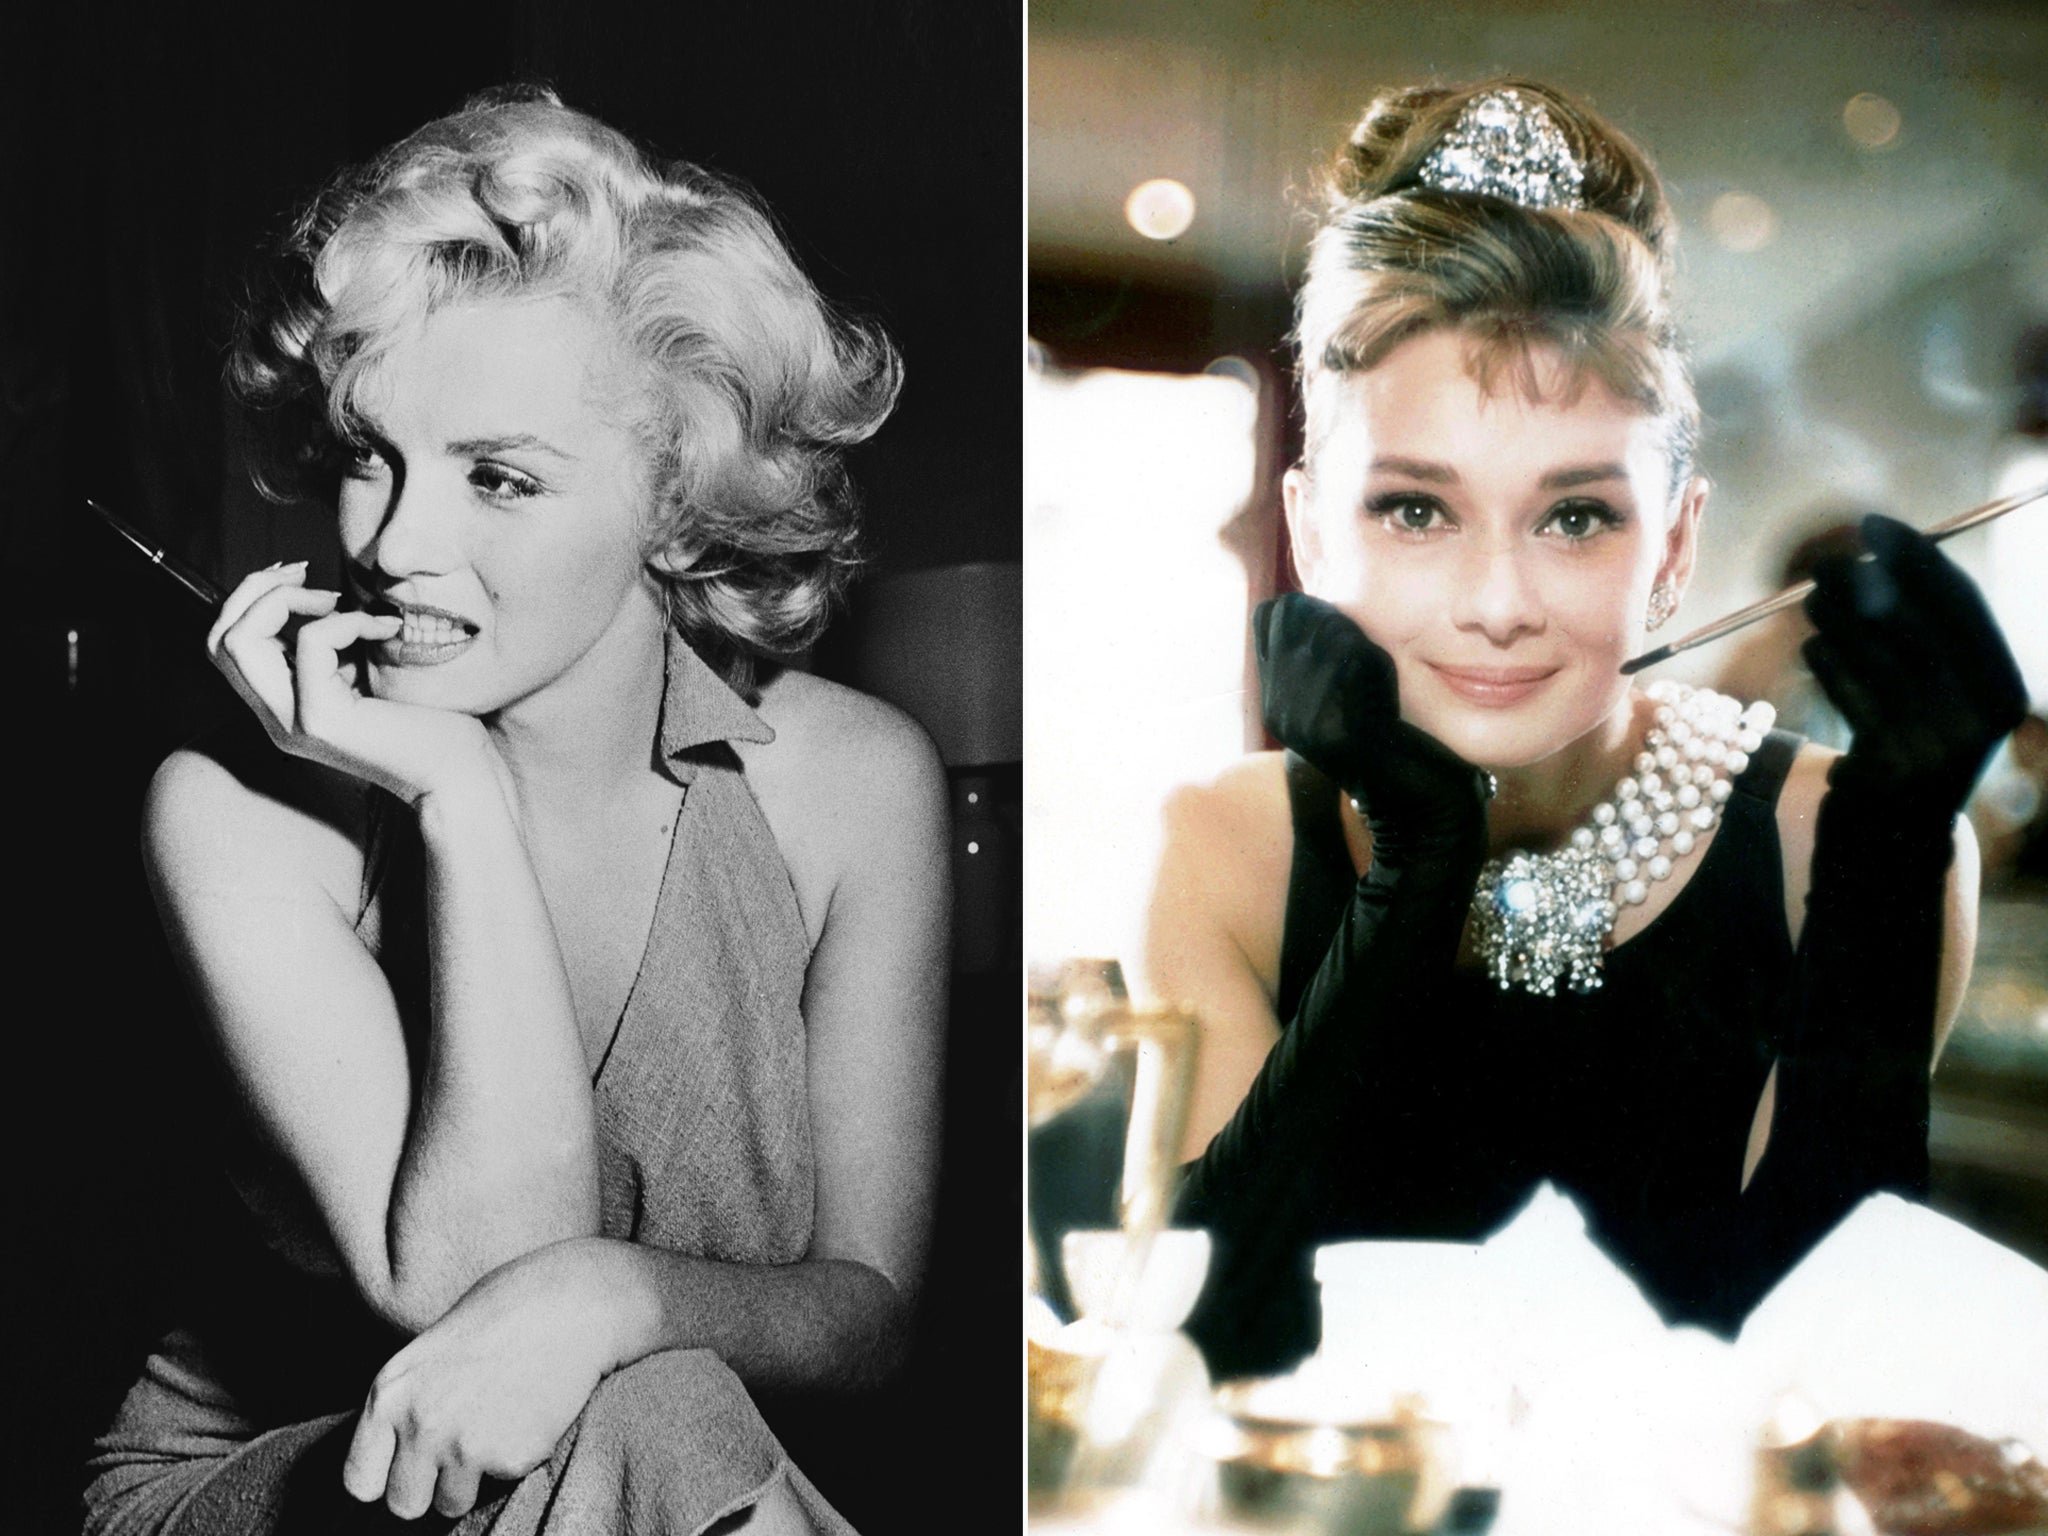 Marilyn Monroe was Truman Capote’s first choice to star in ‘Breakfast at Tiffany’s’ but the role went to Audrey Hepburn